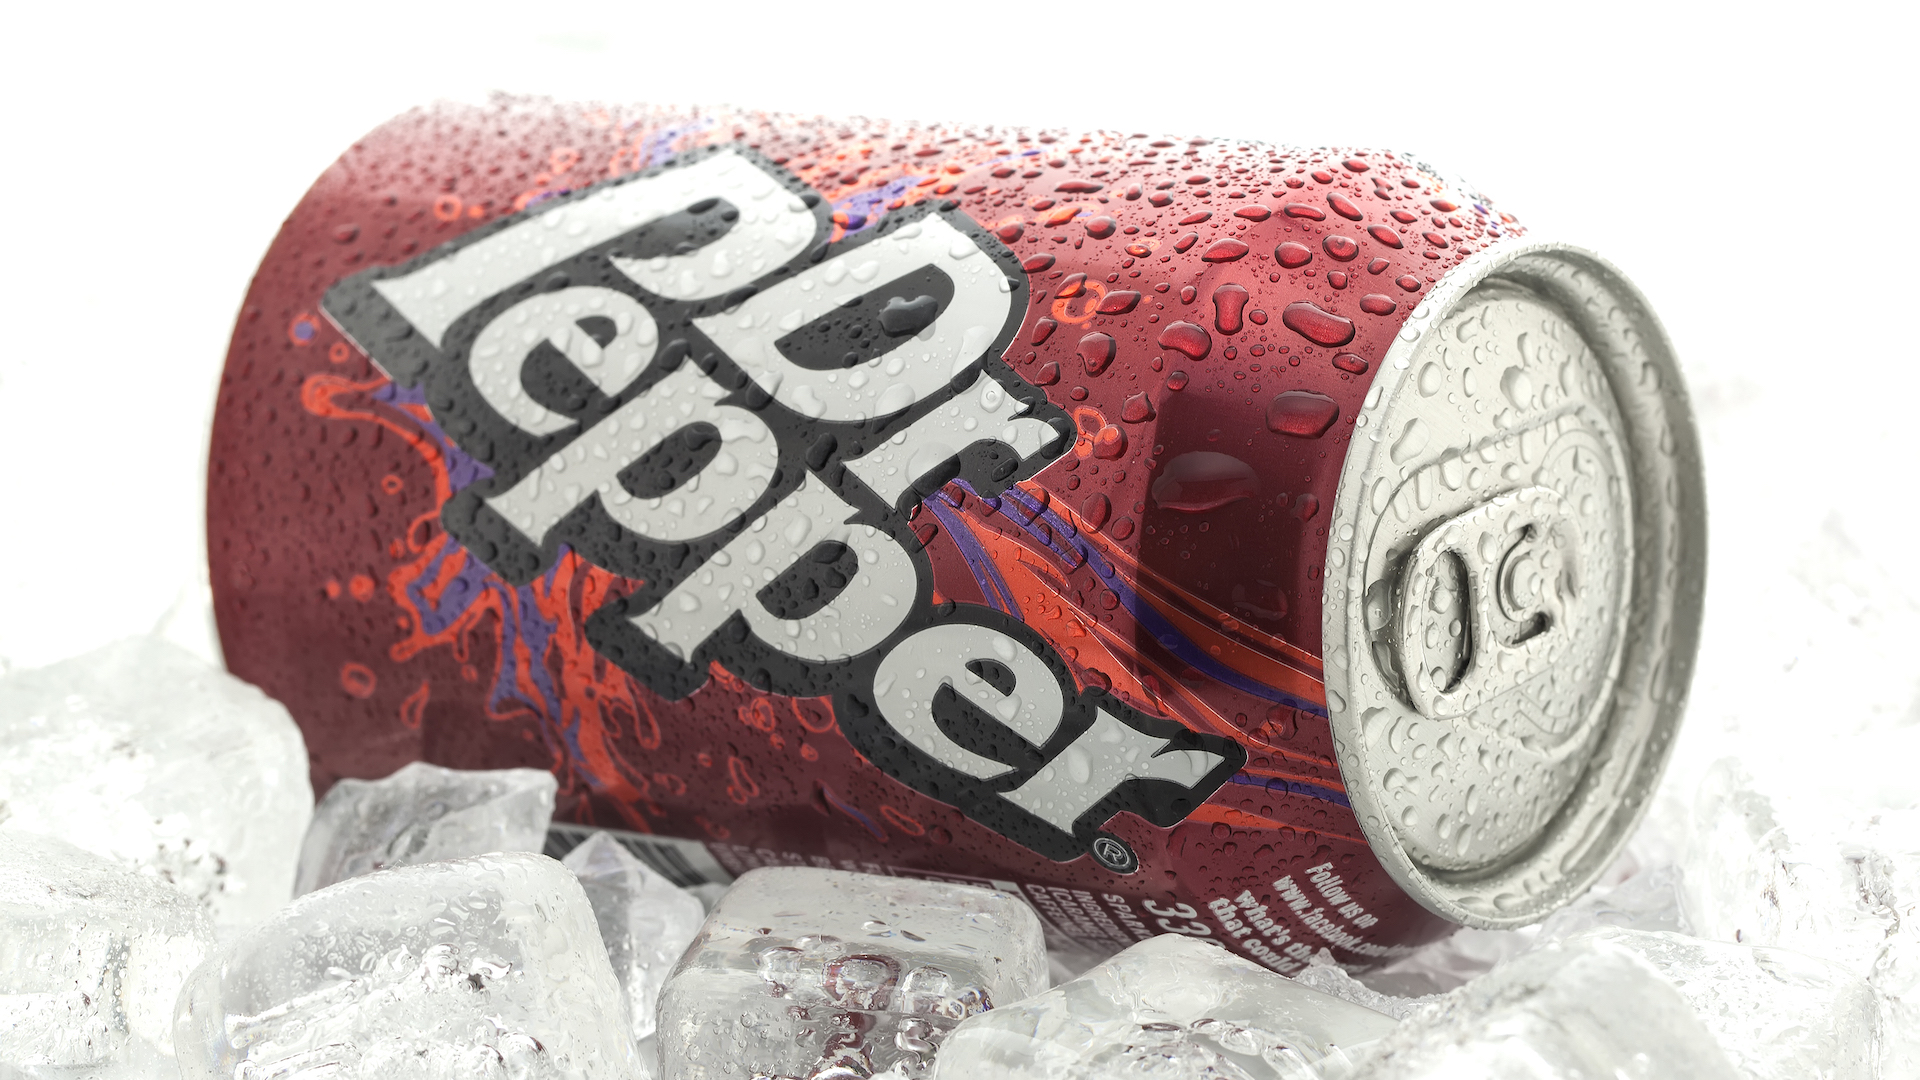 A can of Dr Pepper resting on a bed of ice | How Well Do You Know LDShadowLady